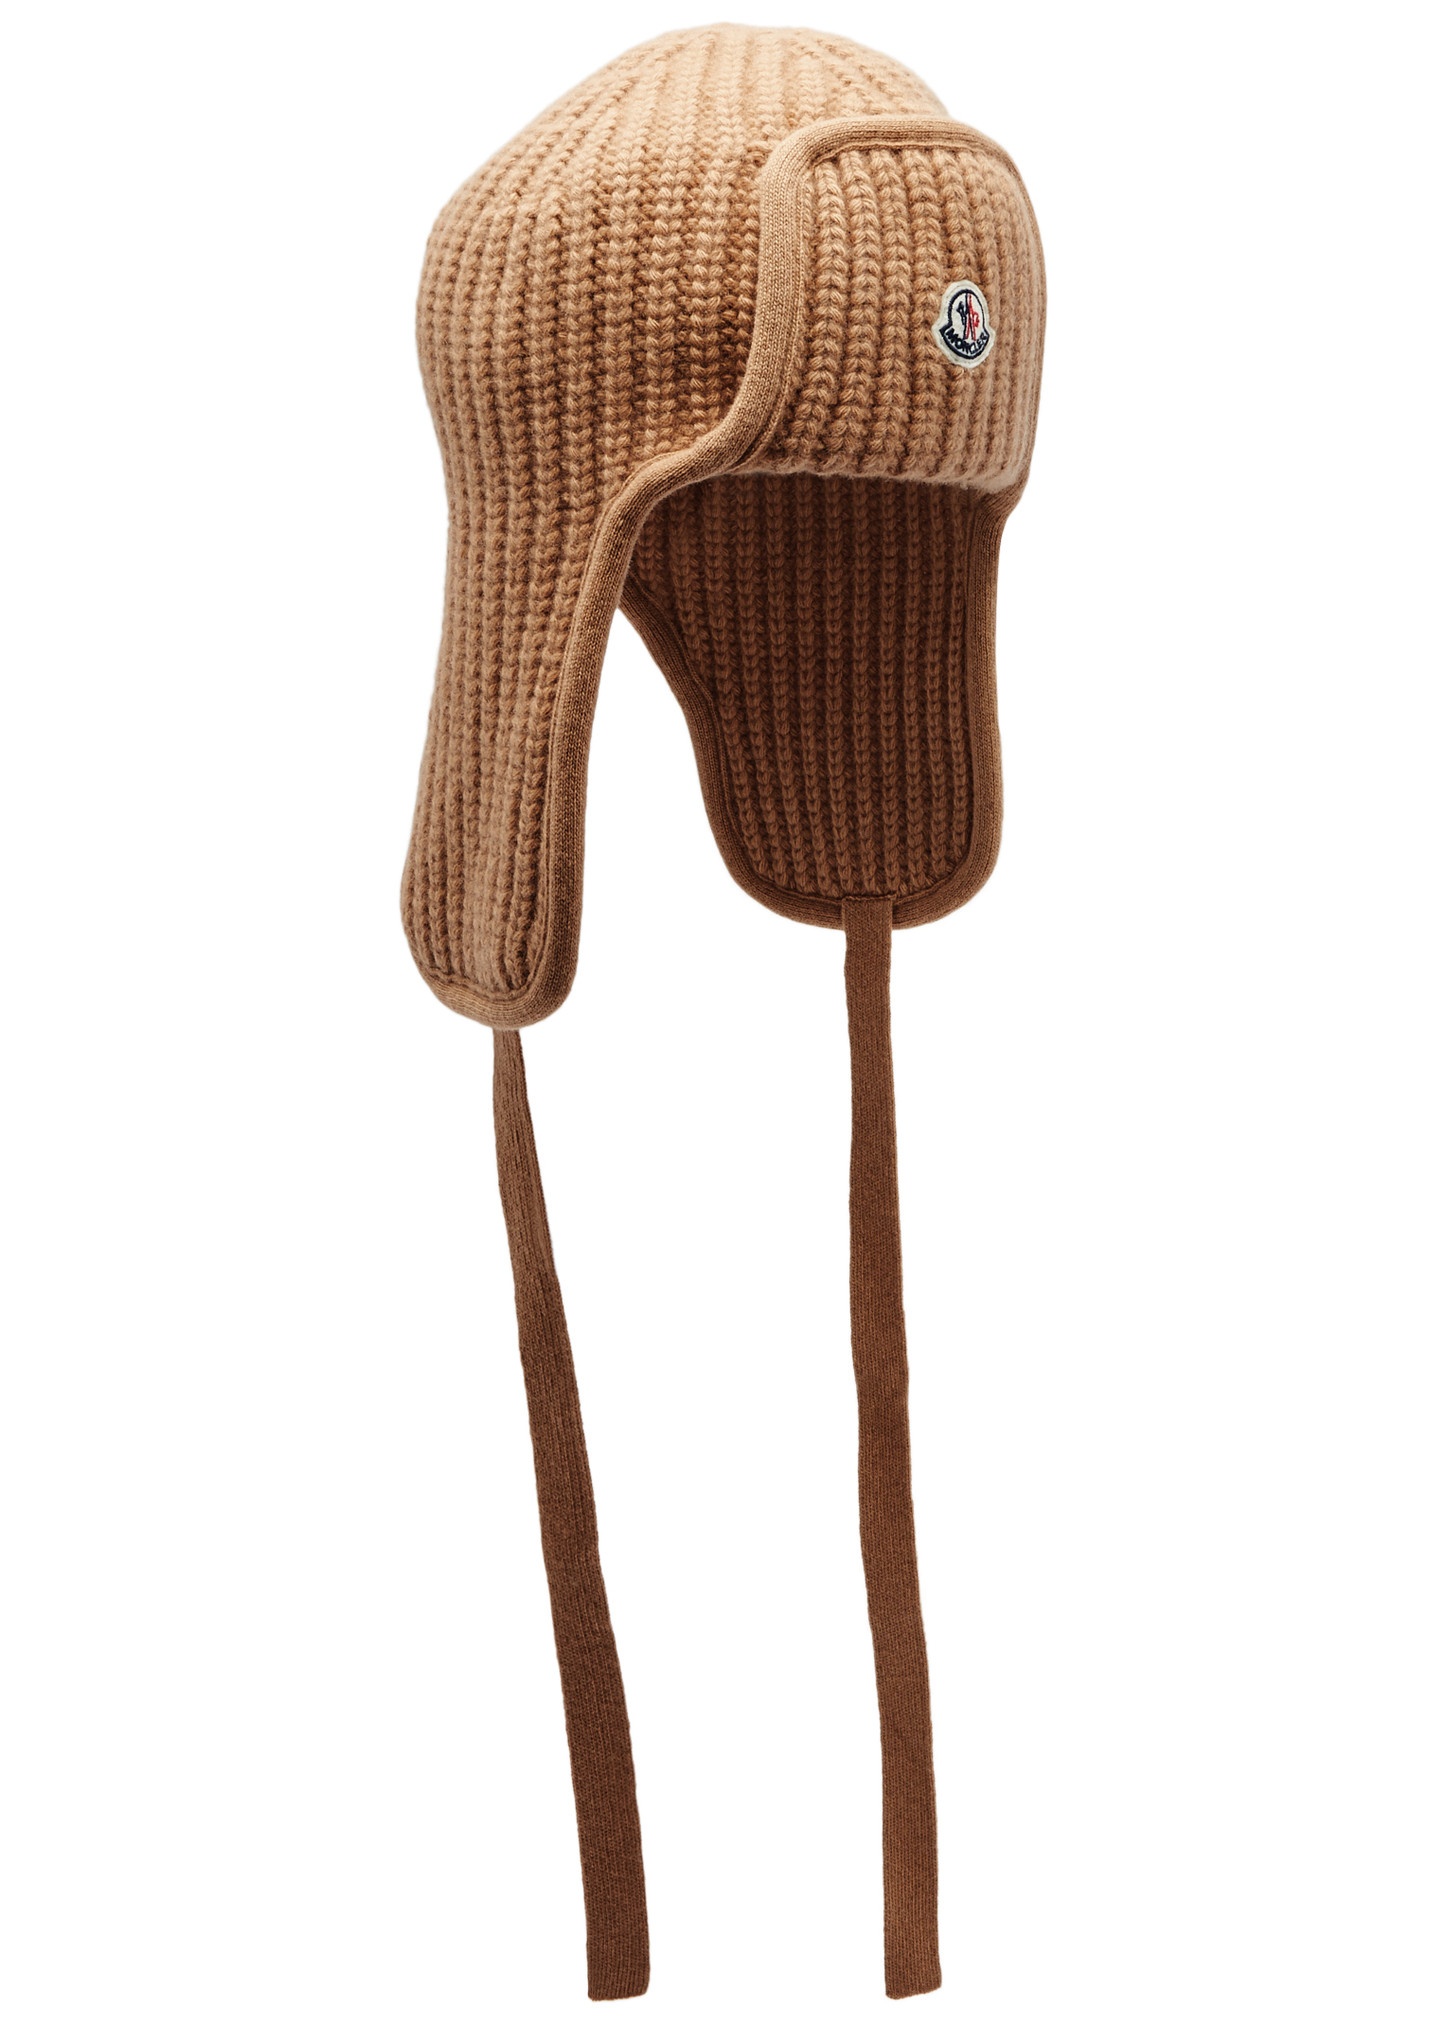 Ribbed wool hat - 1